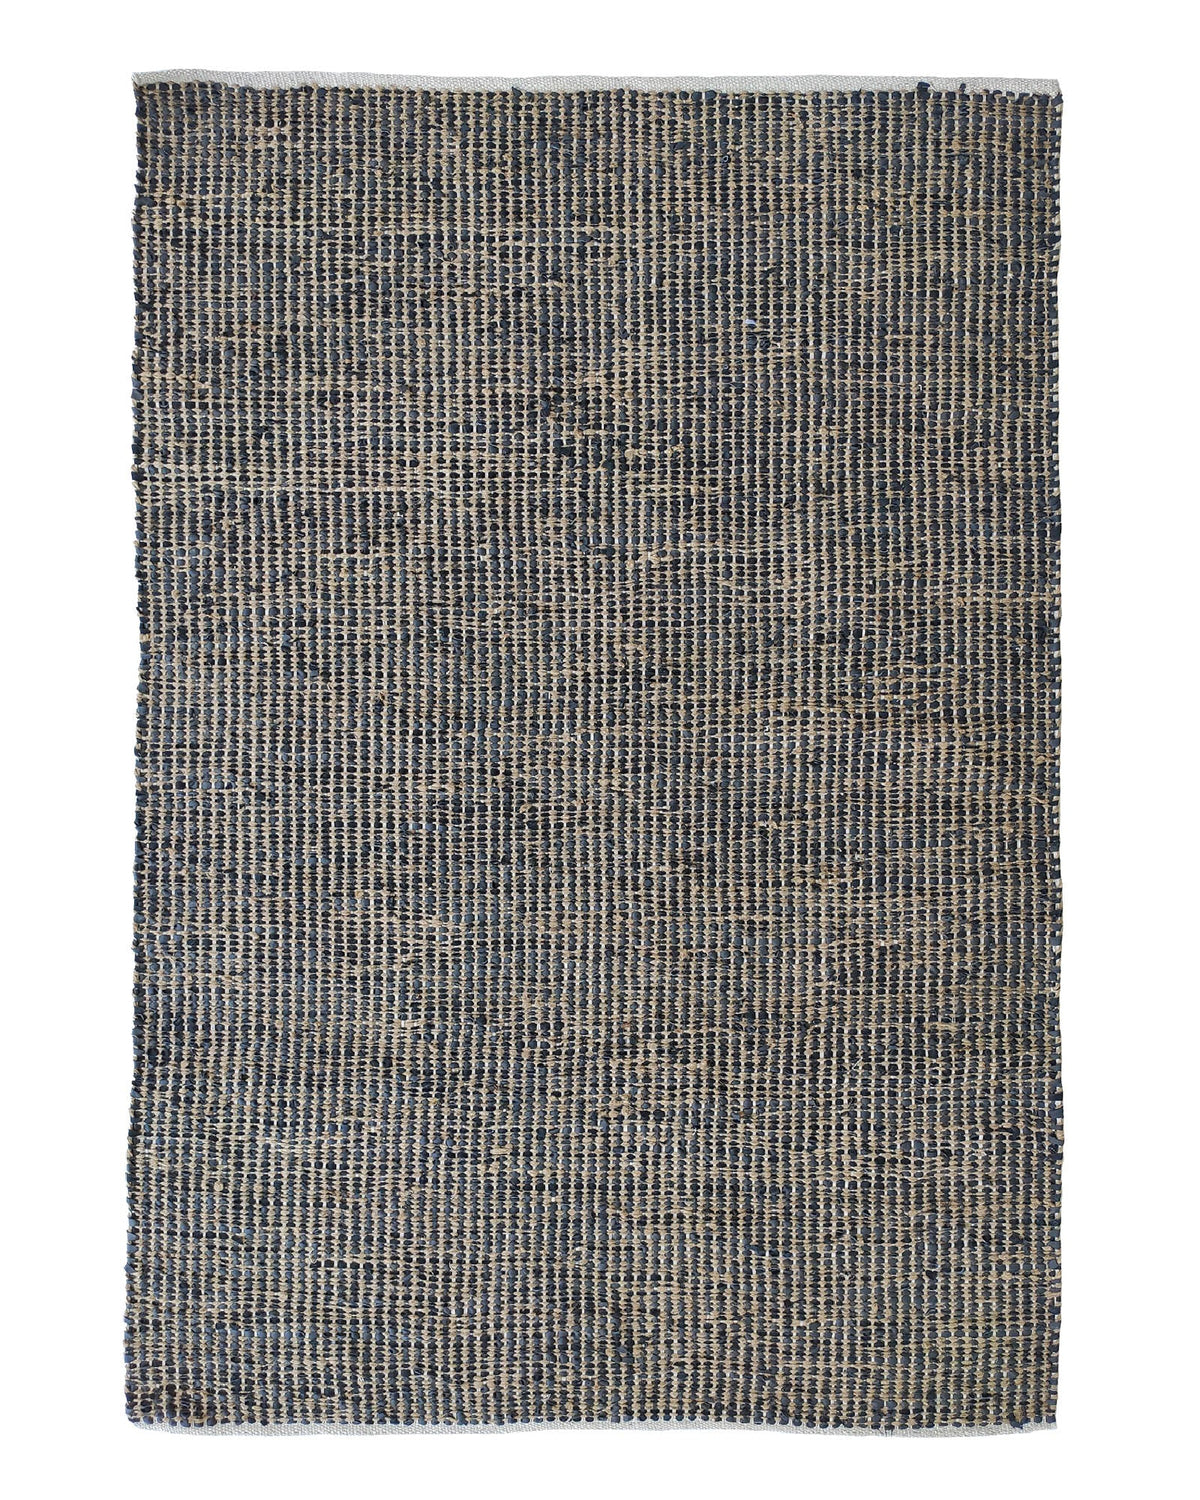 Hand Made Rectangle Home Decor Woven Rug (2 Sizes)